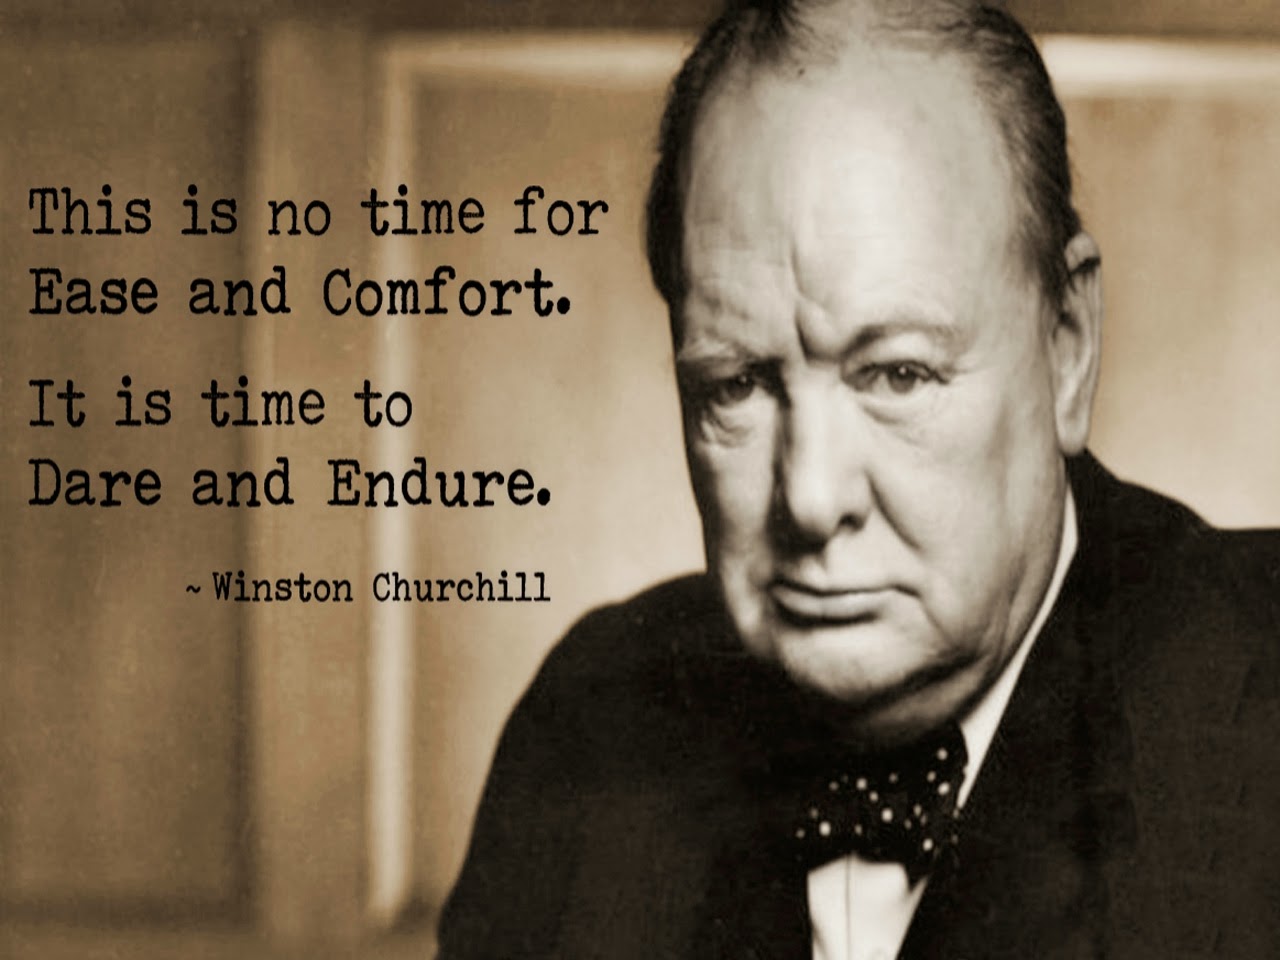 This is no time for ease and comfort. It is time to dare and endure. Winston Churchill